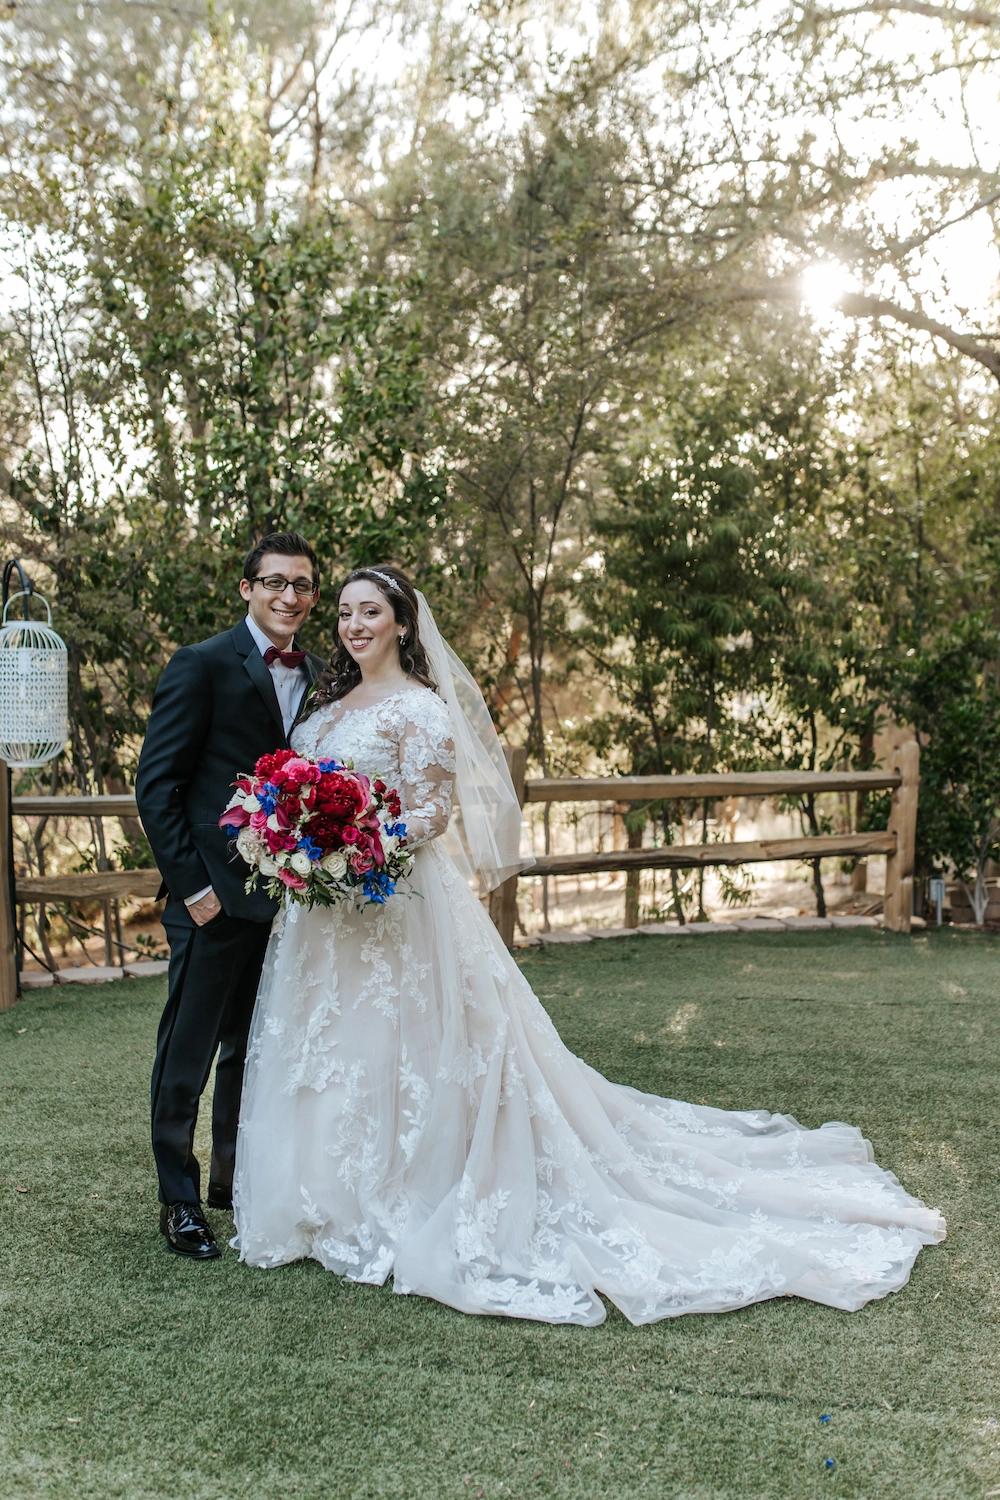 Alexis Marries In Floral Lace A-Line Wedding Dress Image